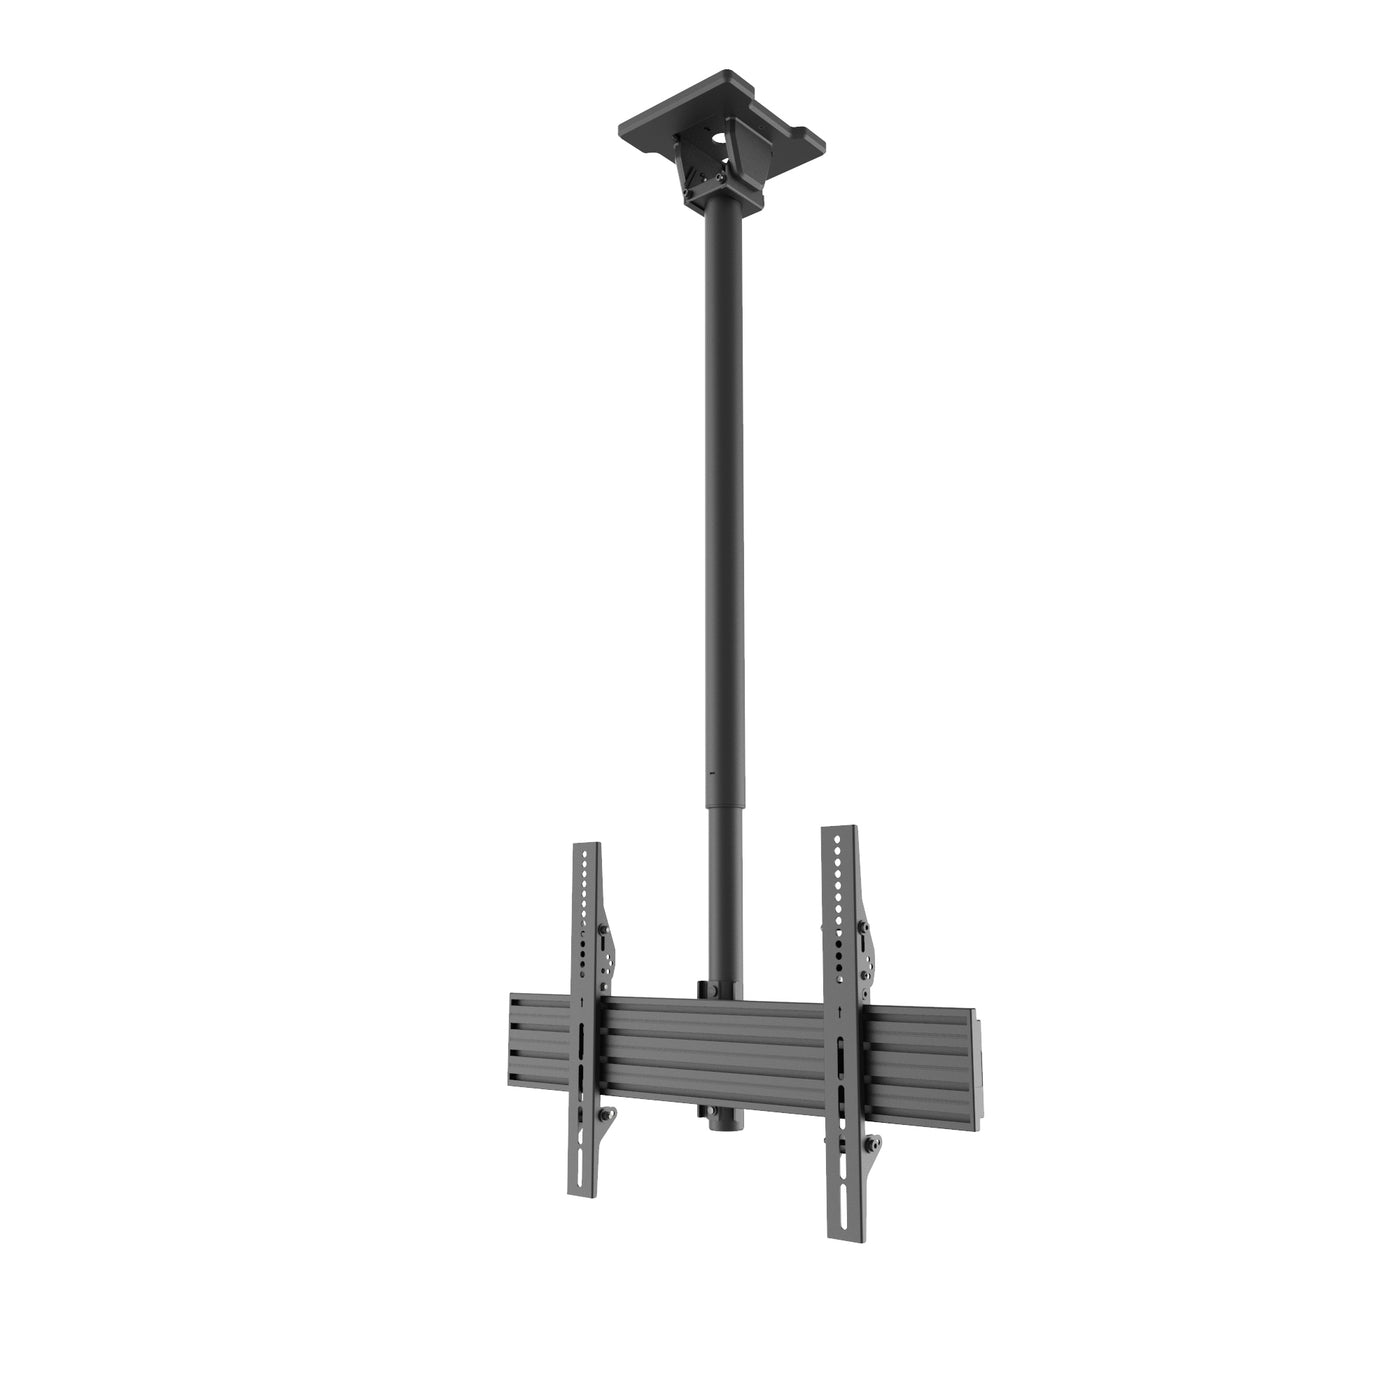 Hanging TV Ceiling Mount for 37" to 70" TVs - CM600